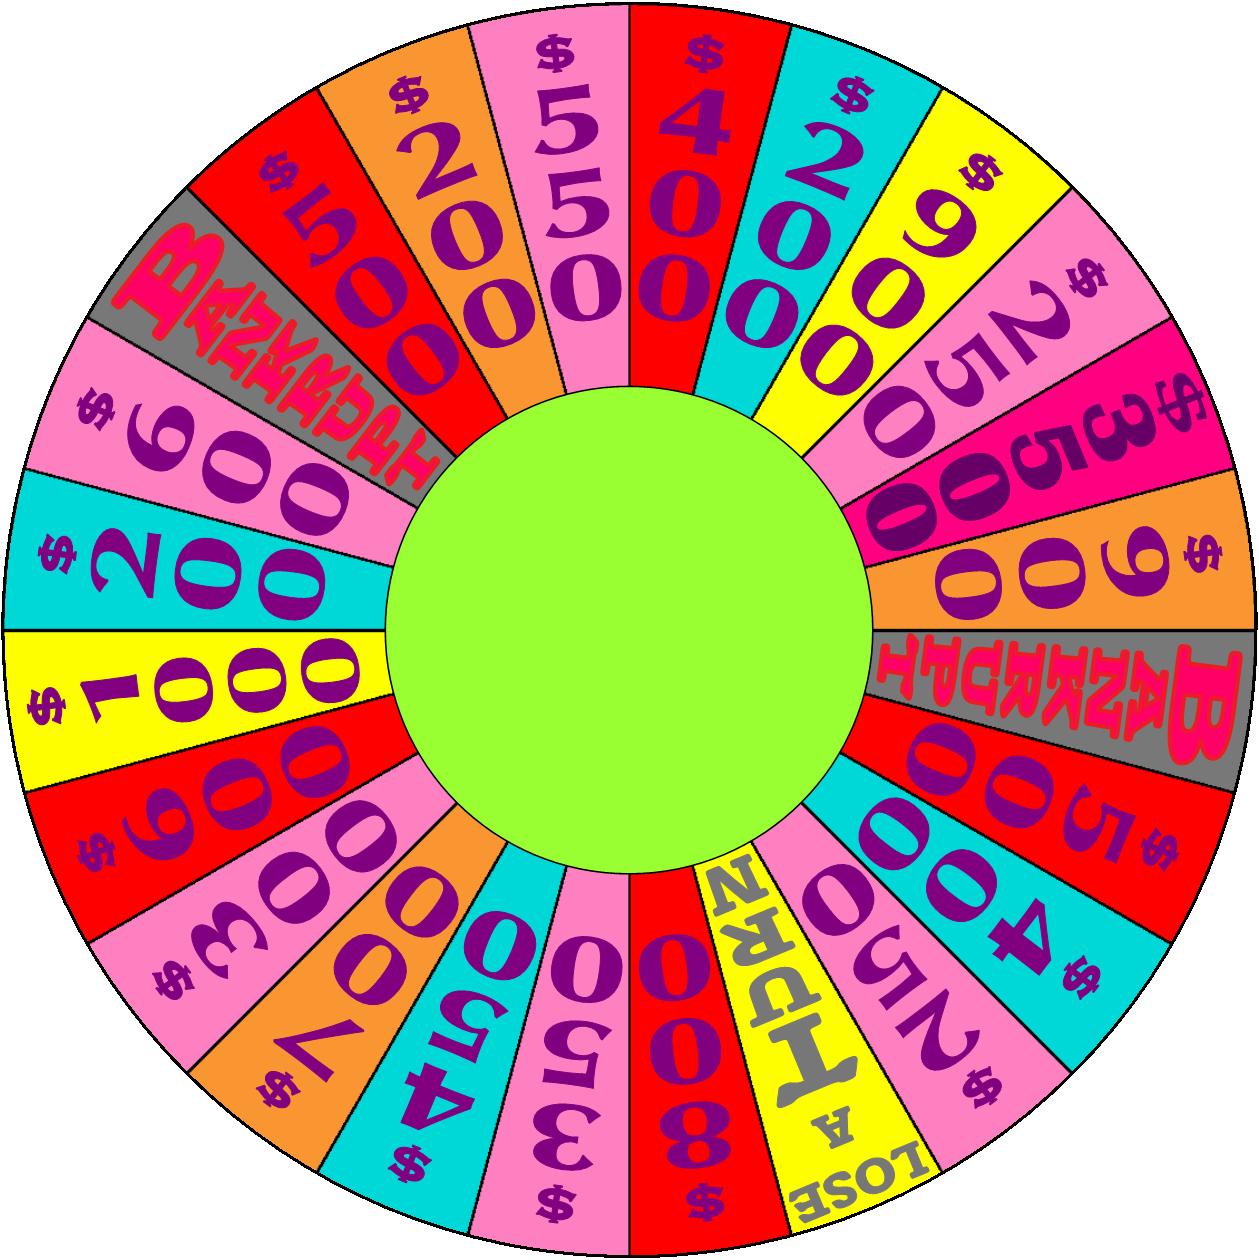 Brite Wheel of Fortune 2 by germanname